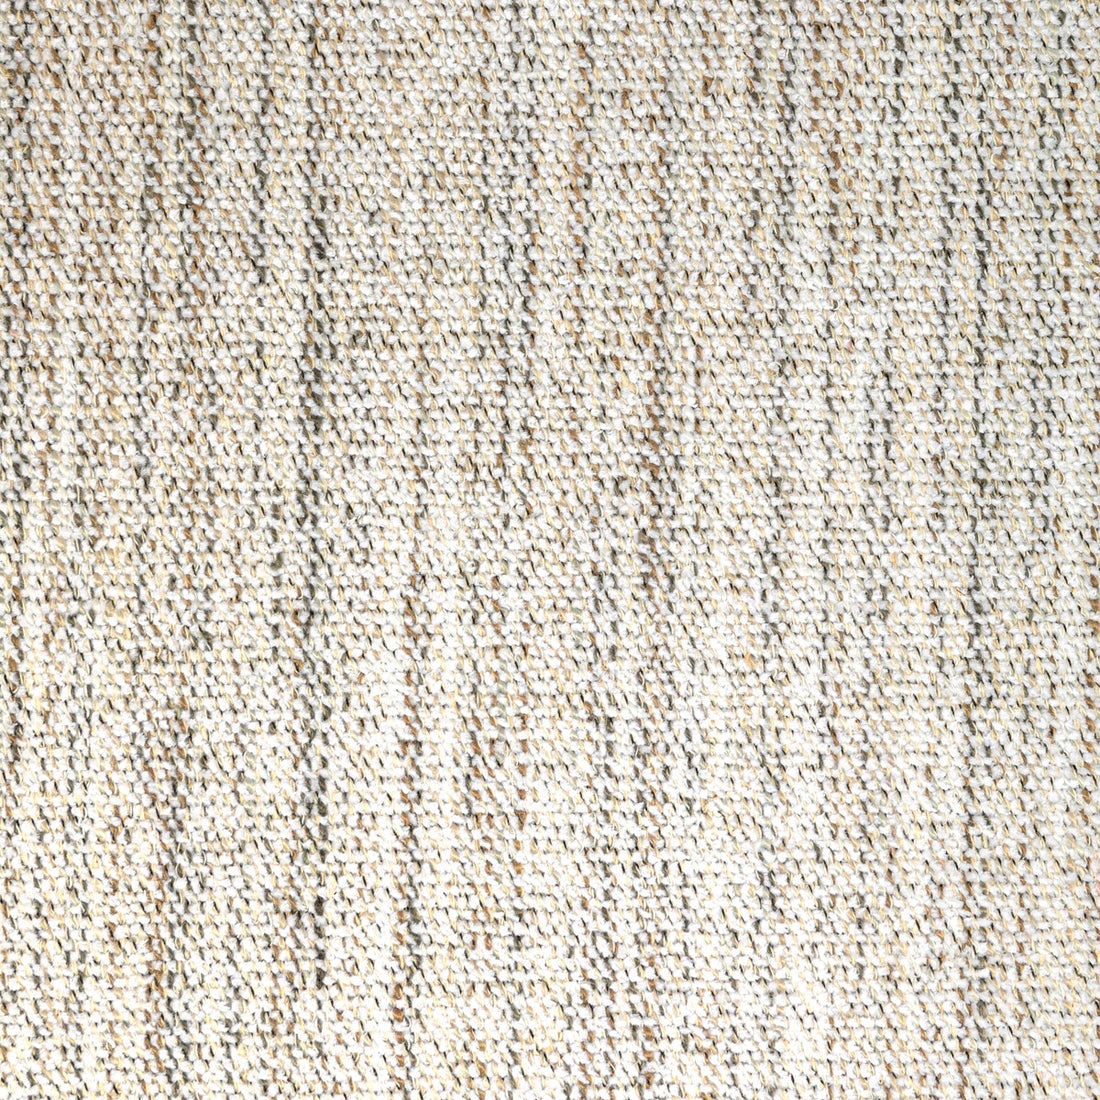 Delfino fabric in tusk color - pattern 36748.11.0 - by Kravet Contract in the Refined Textures Performance Crypton collection